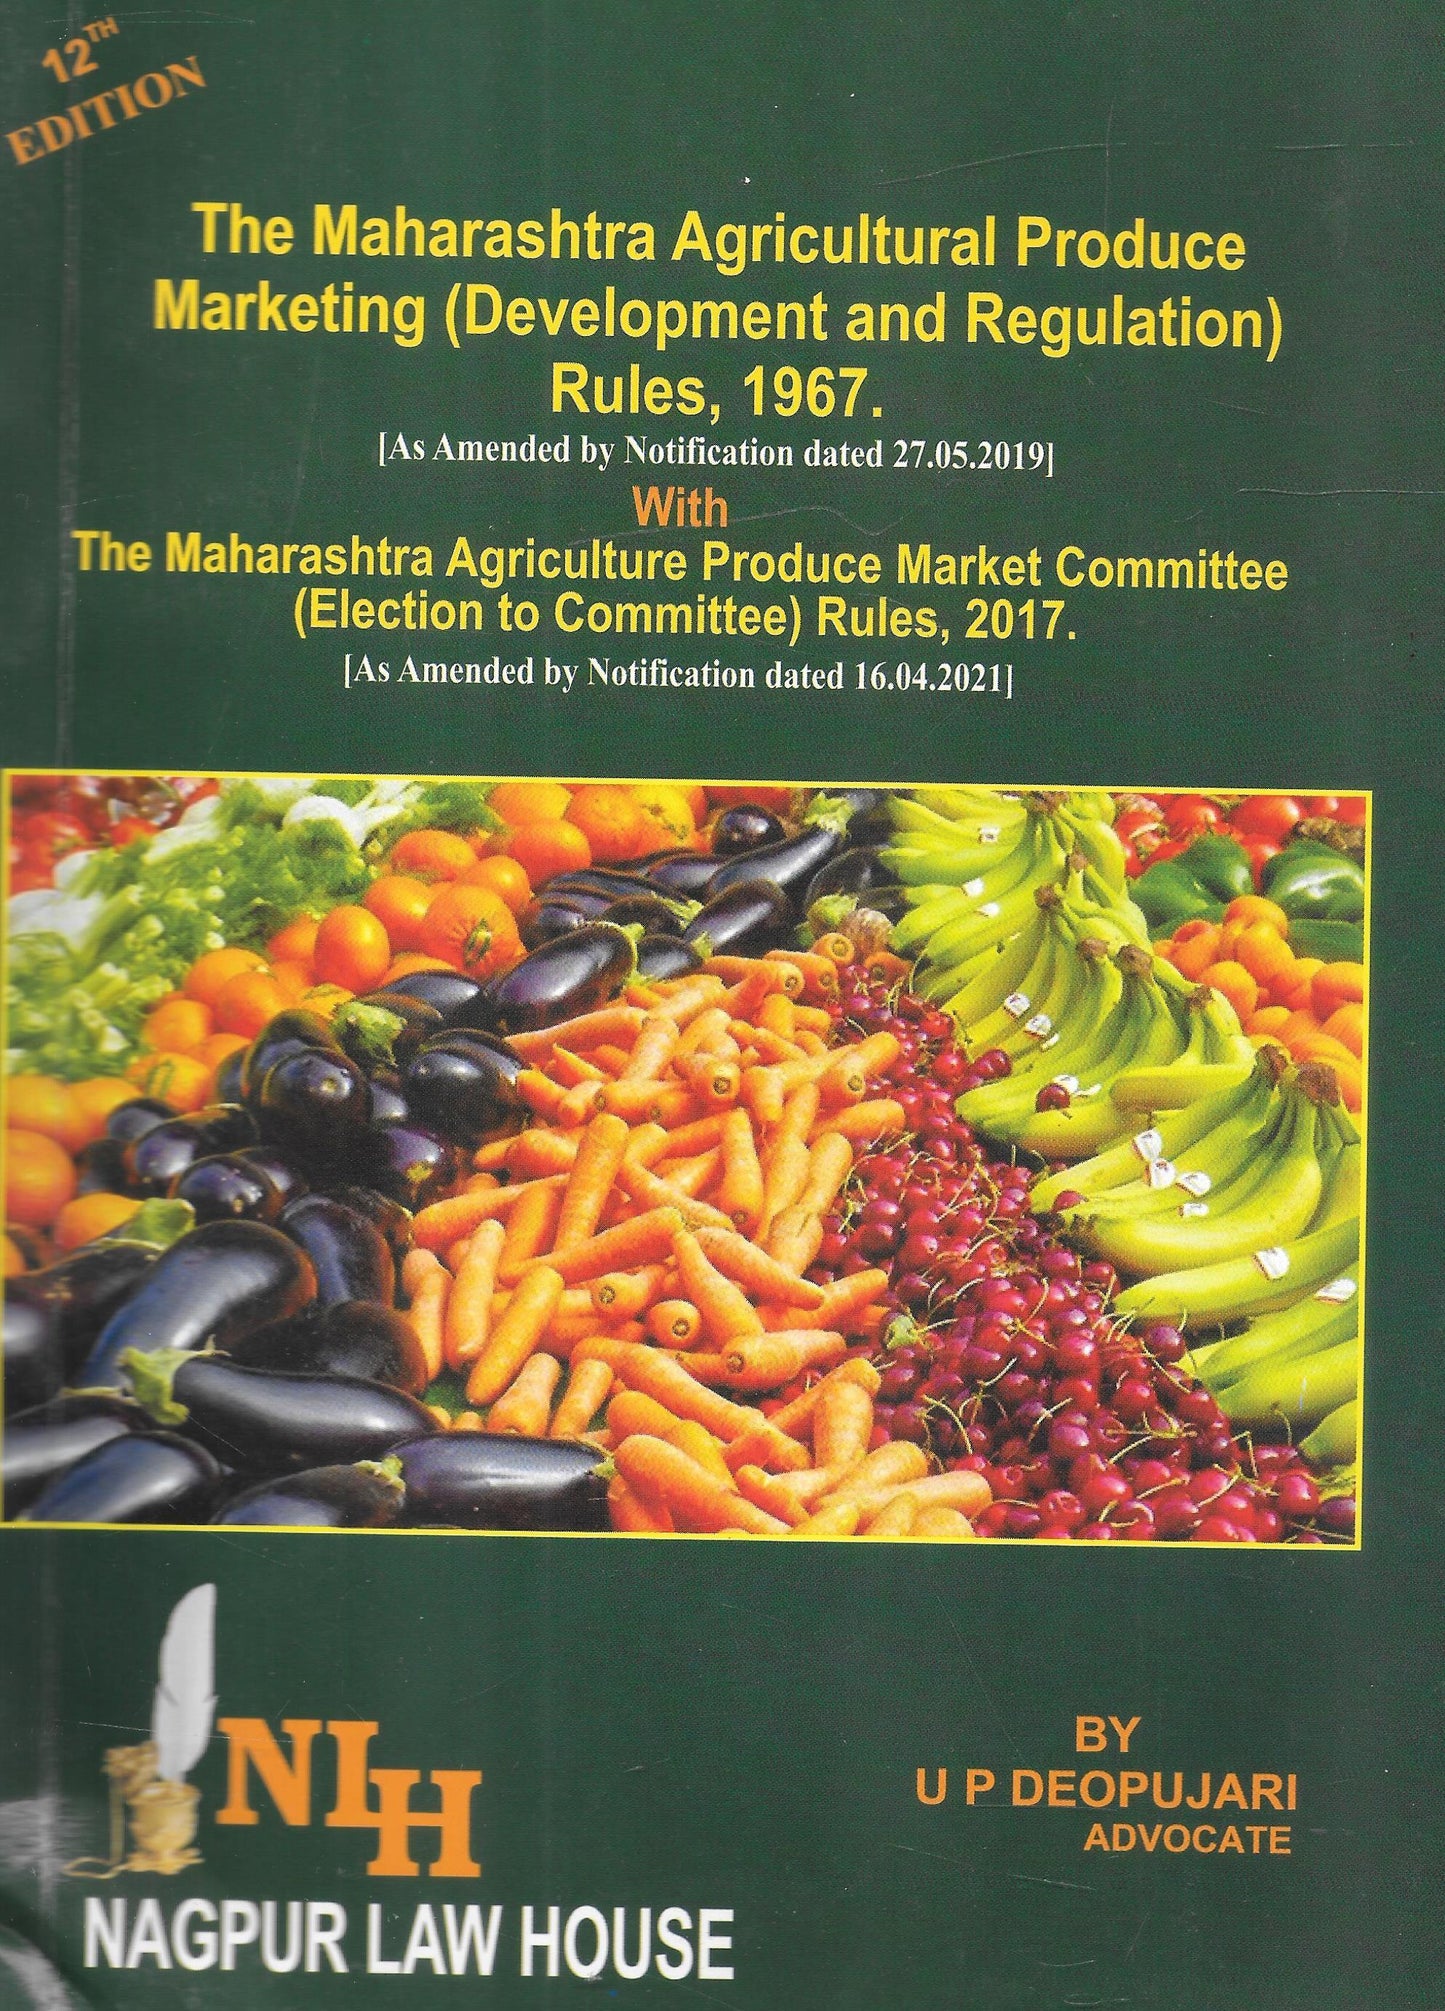 The Maharashtra Agricultural Produce Marketing (Development And Regulation) Act and Rules